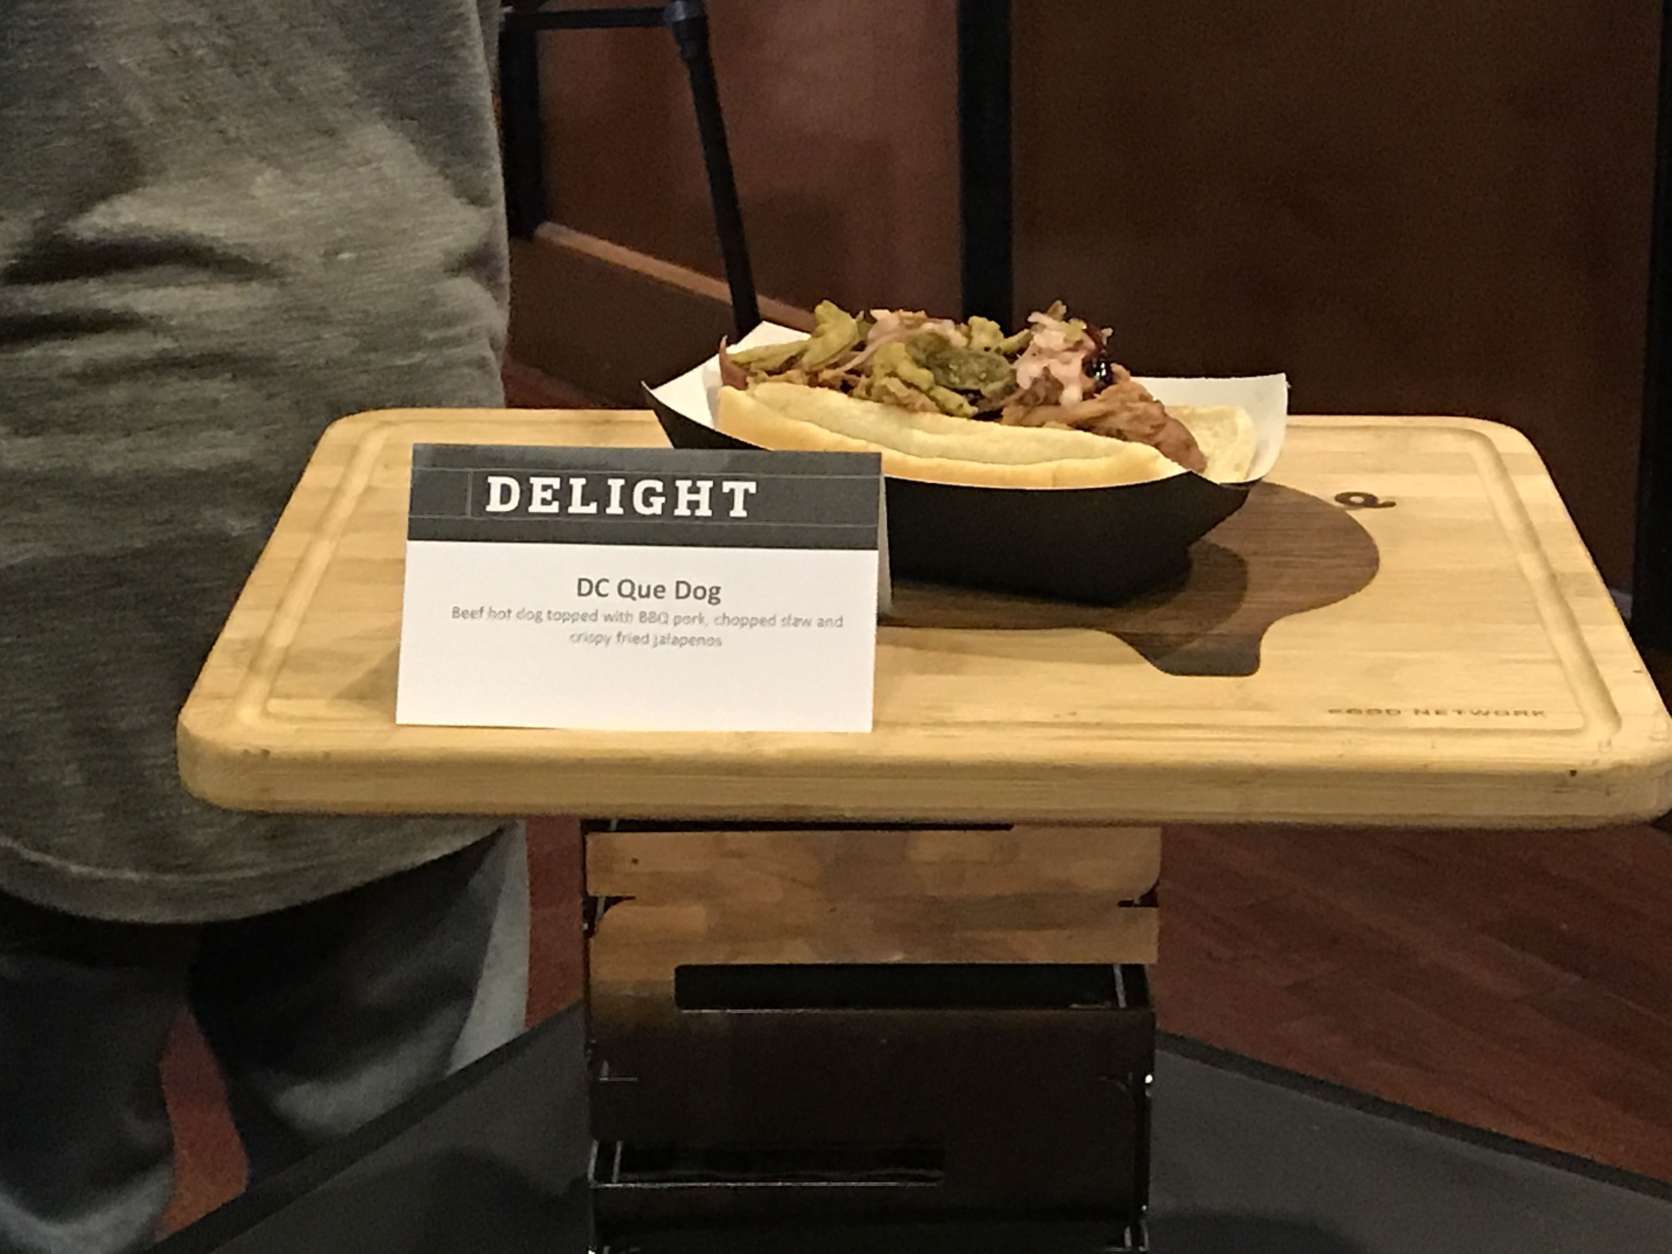 Another new food item is this DC Que Dog, which is a beef hotdog topped with BBQ pork, chopped slaw and crispy fried jalapenos. (WTOP/Ginger Whitaker)